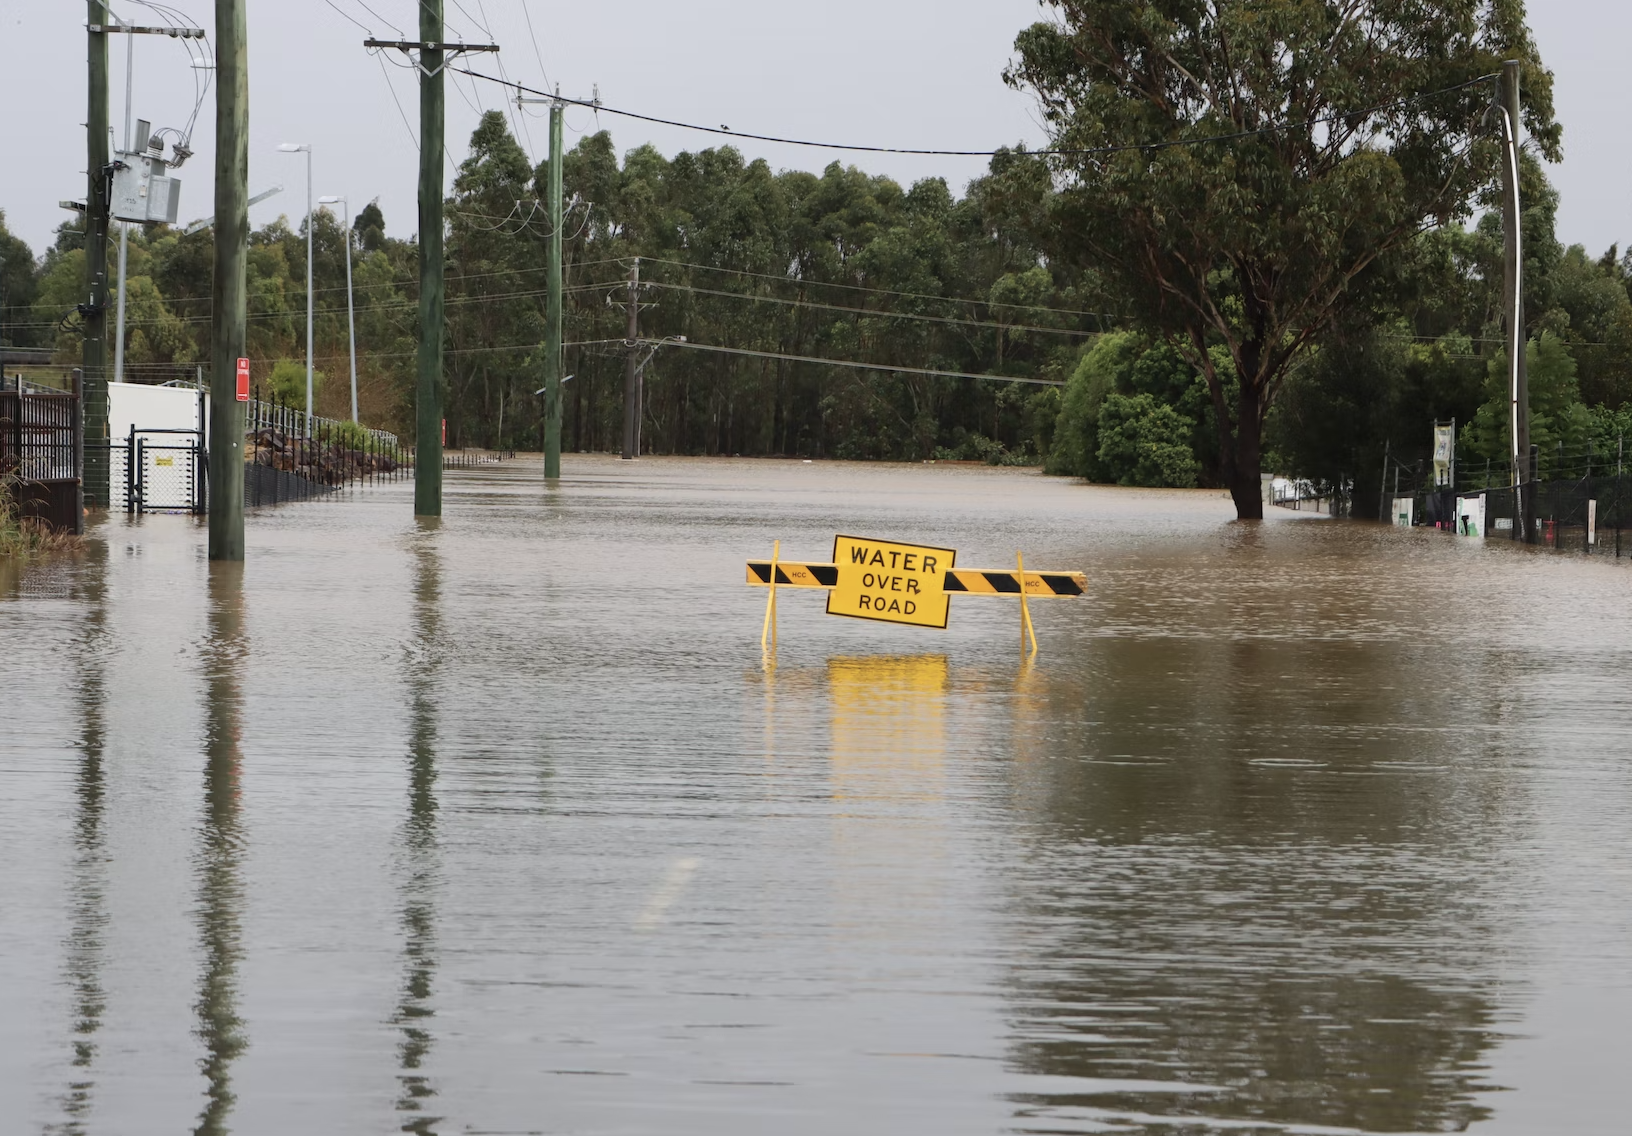 Street flooded with sign “Water over load”.